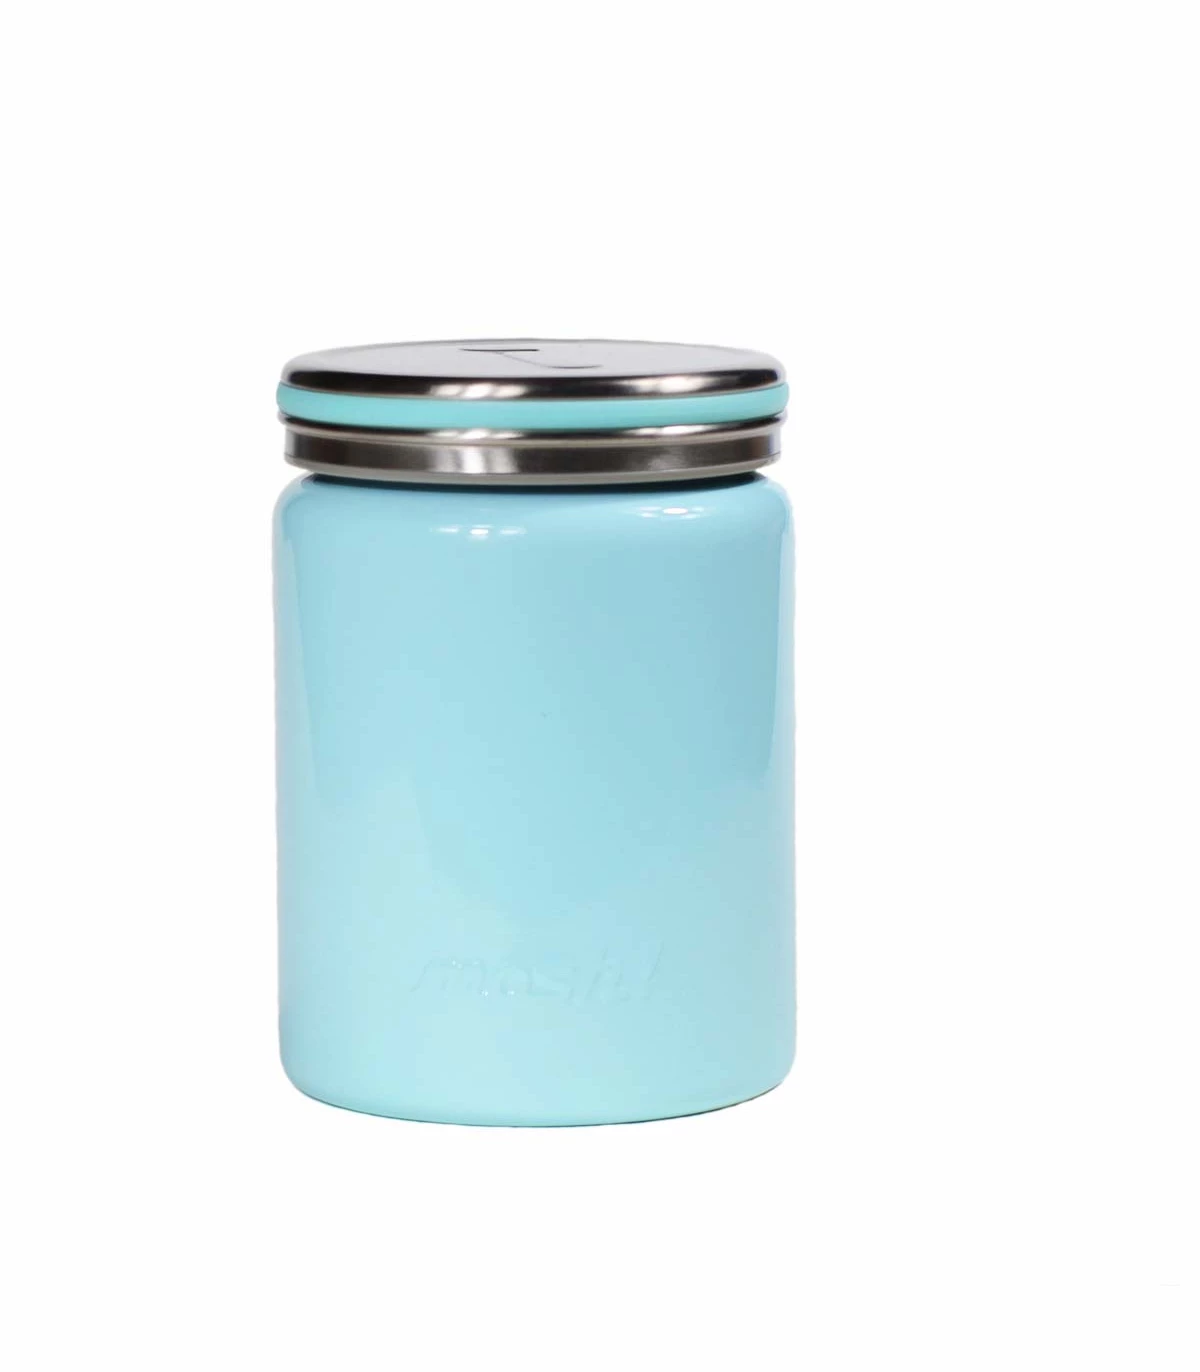 https://takaterra.com/3805-superlarge_default/insulated-food-container-stainless-steel-blue-mosh.webp